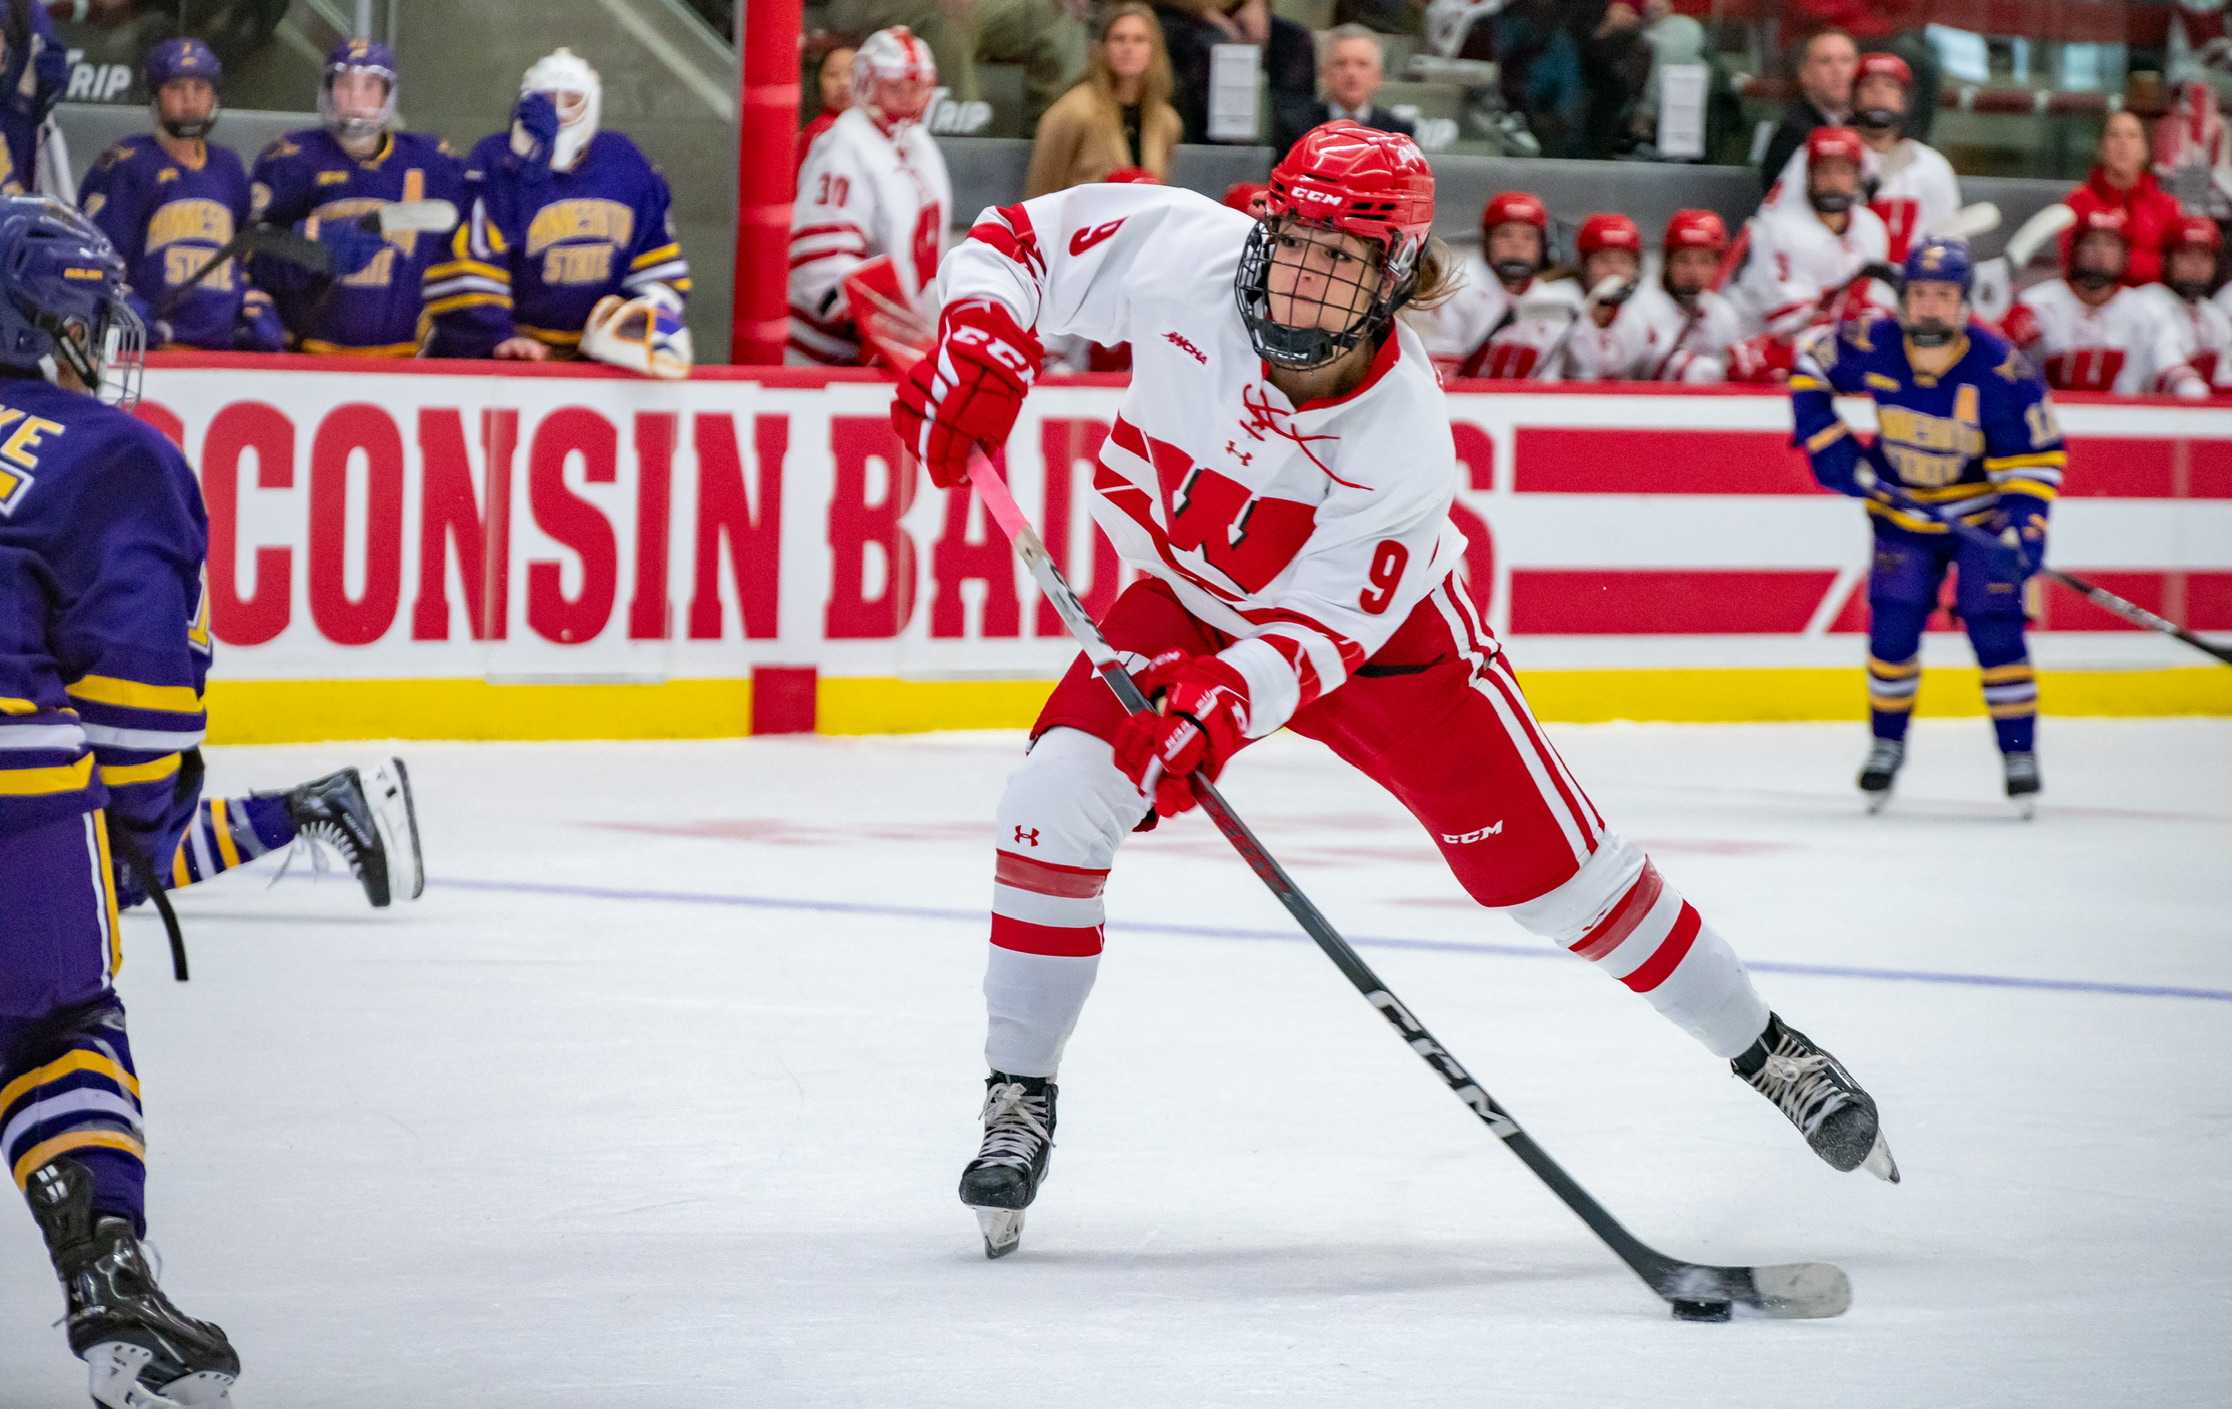 Hat-trick heroes Edwards and Simms propel No. 2 Badgers to weekend dominance · The Badger Herald